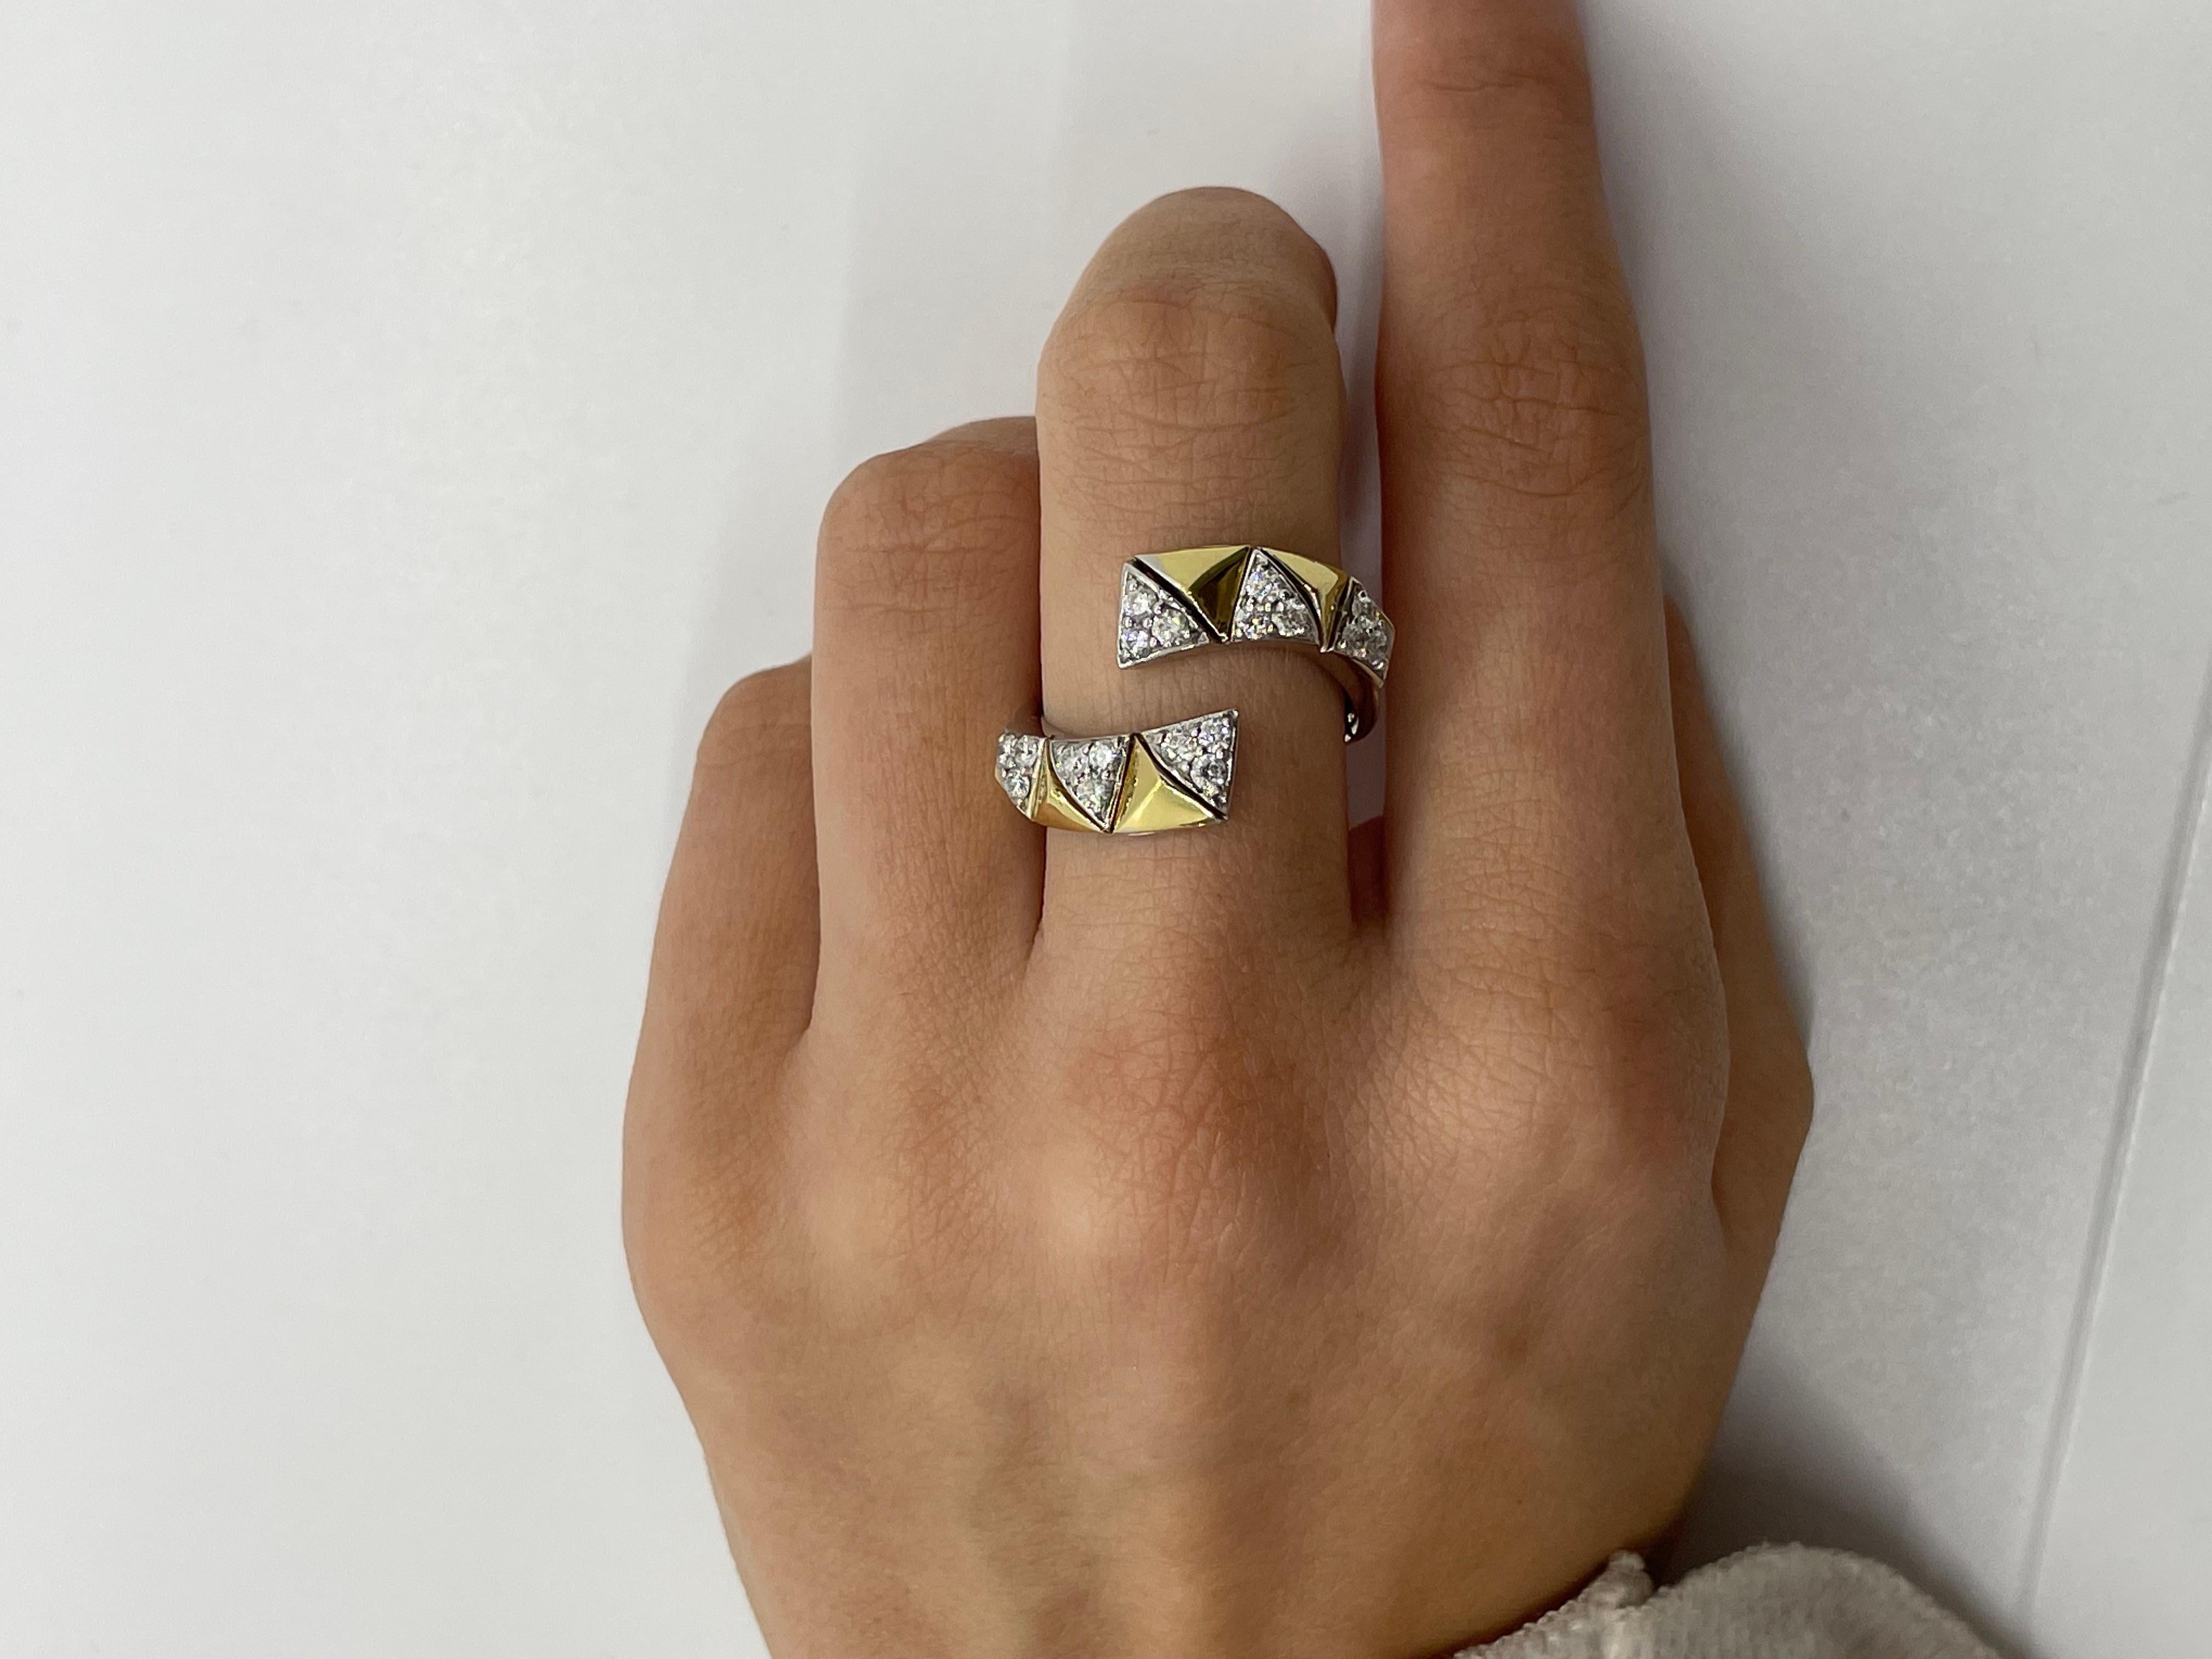 For Sale:  Okre by Yessayan, Pyramid Yellow & White Gold Diamond Ring 4